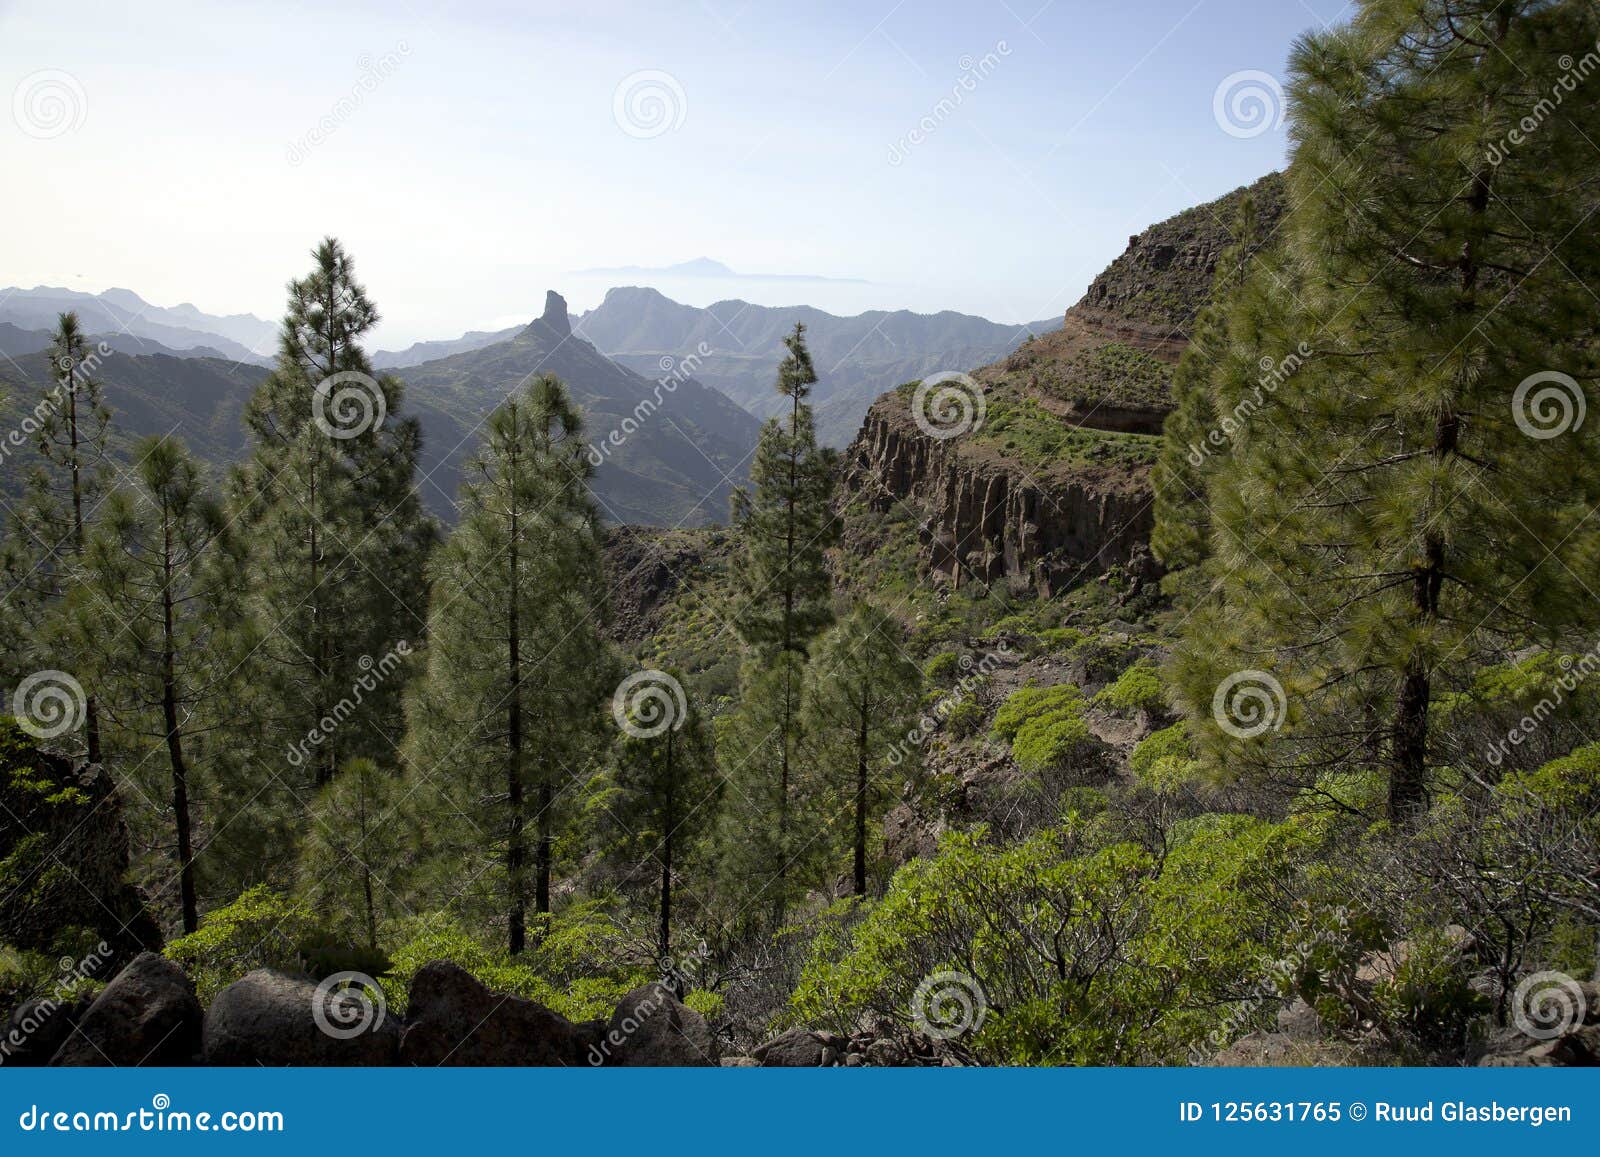 Stunning Nature in the Forrest of Gran Canaria, Canary Island Under Spanish Flag Stock Image - Image of volcanism, canaria: